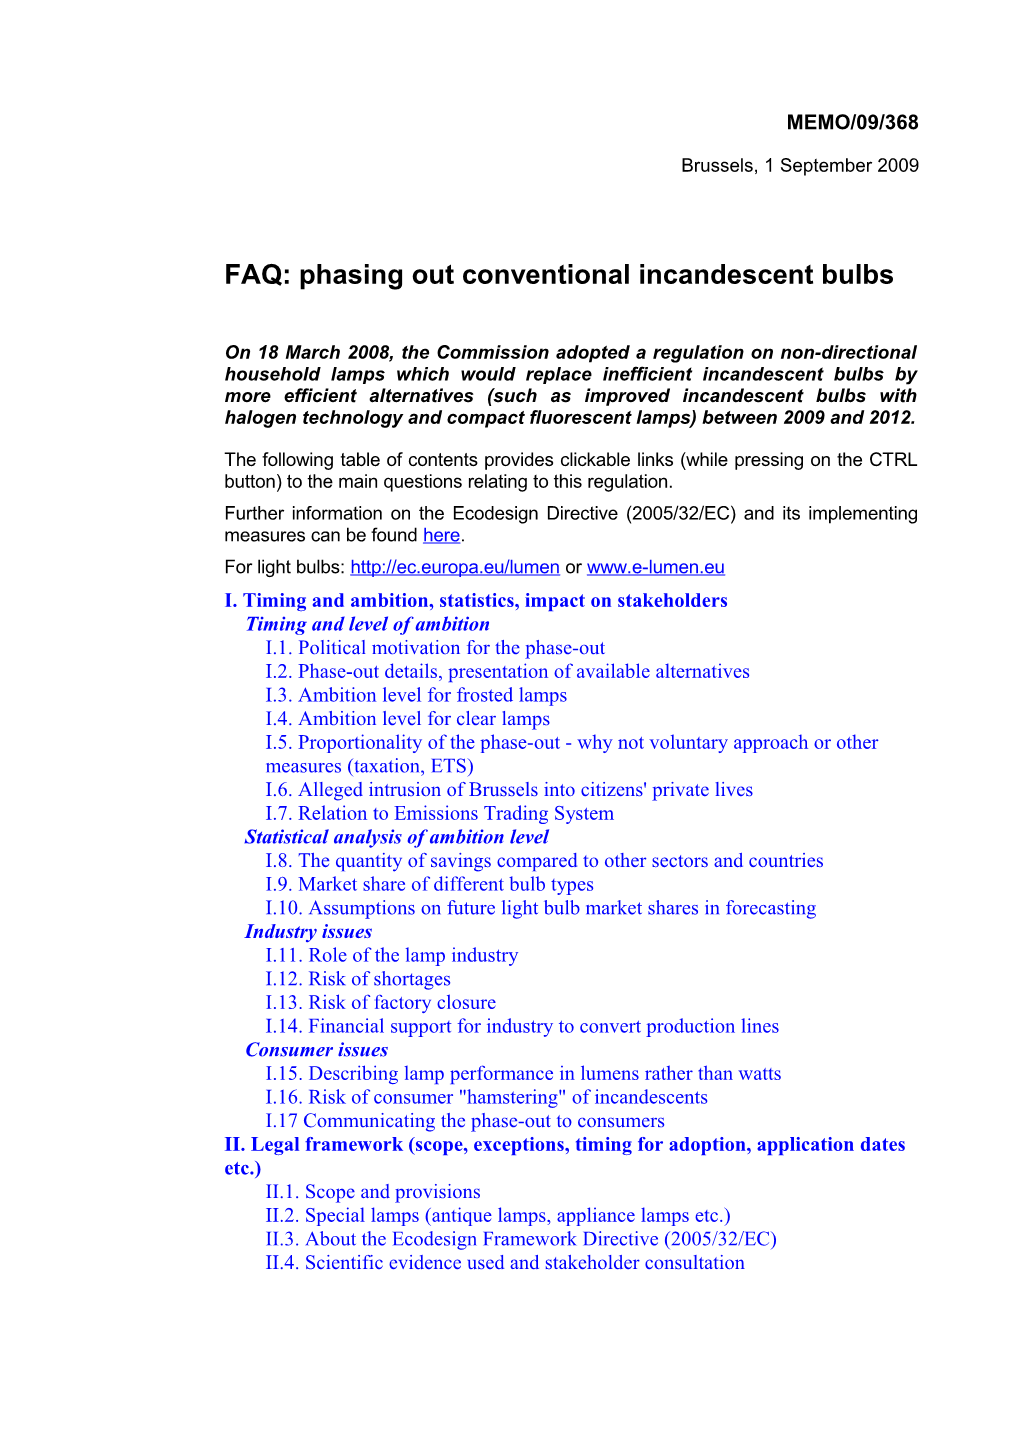 FAQ: Phasing out Conventional Incandescent Bulbs